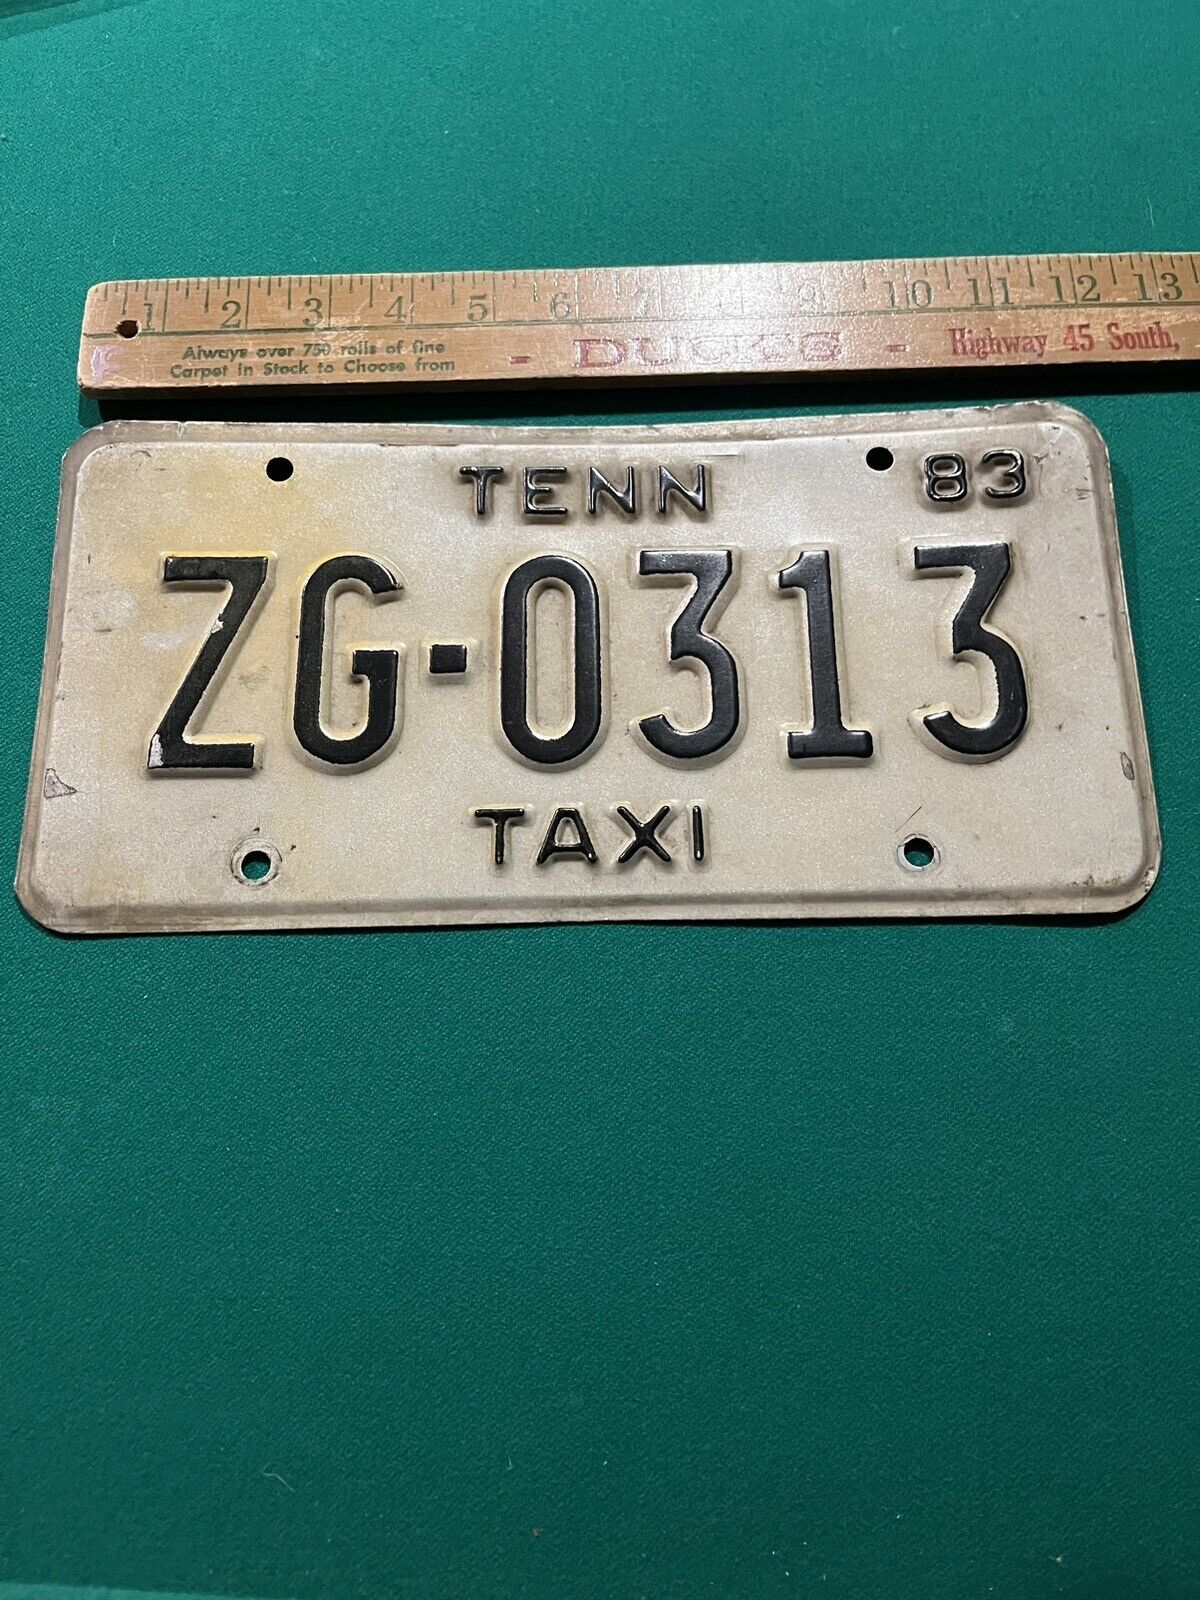 1983 Original Tennessee Taxi Cab License Plate # ZG-0313